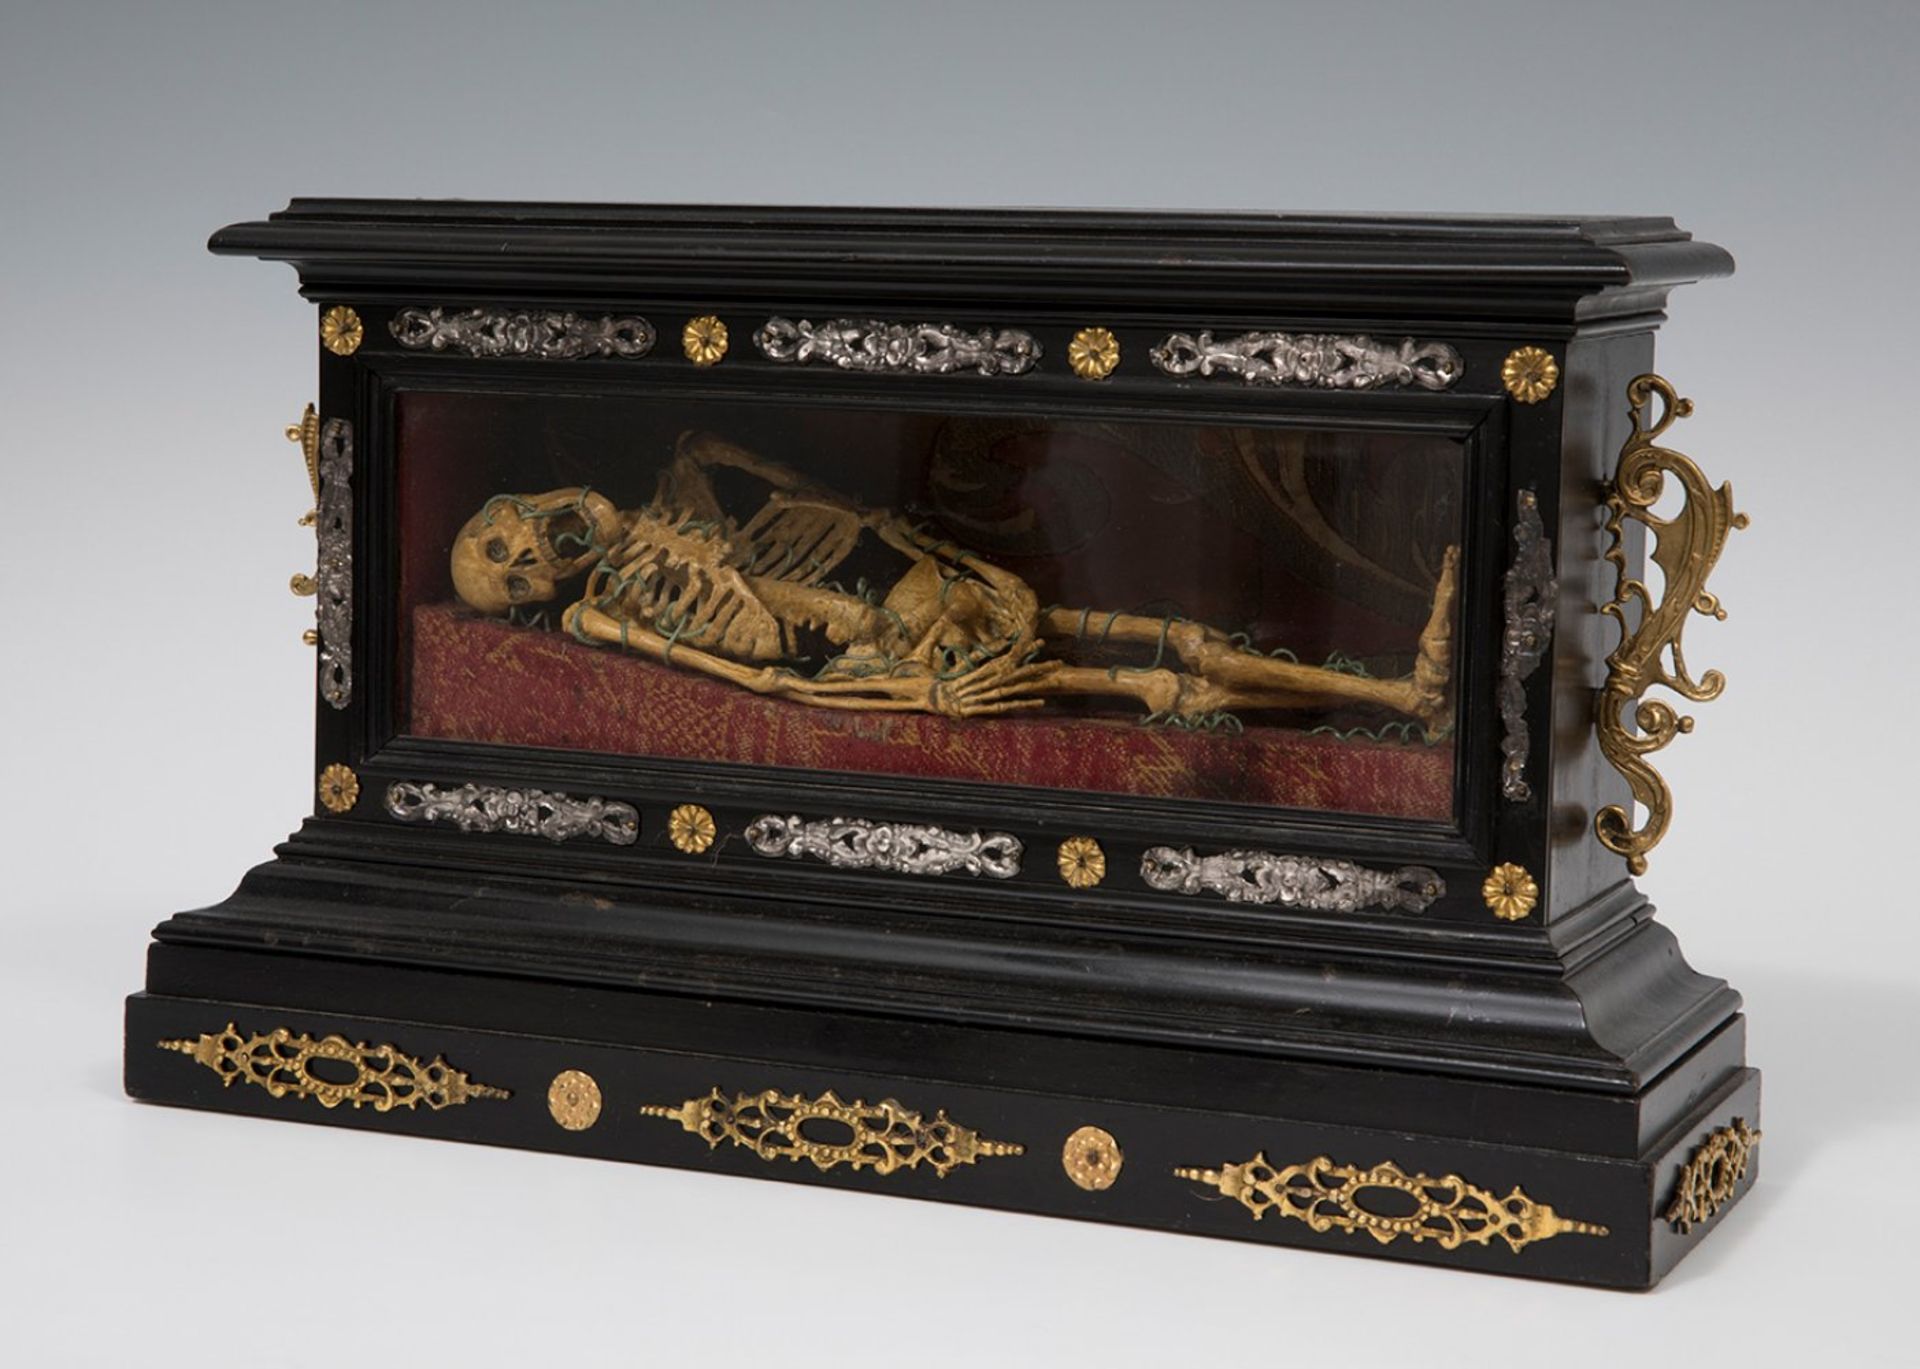 Italian school, 17th century."Vanitas".Carved and polychrome wood. Brass, bronze and silver.